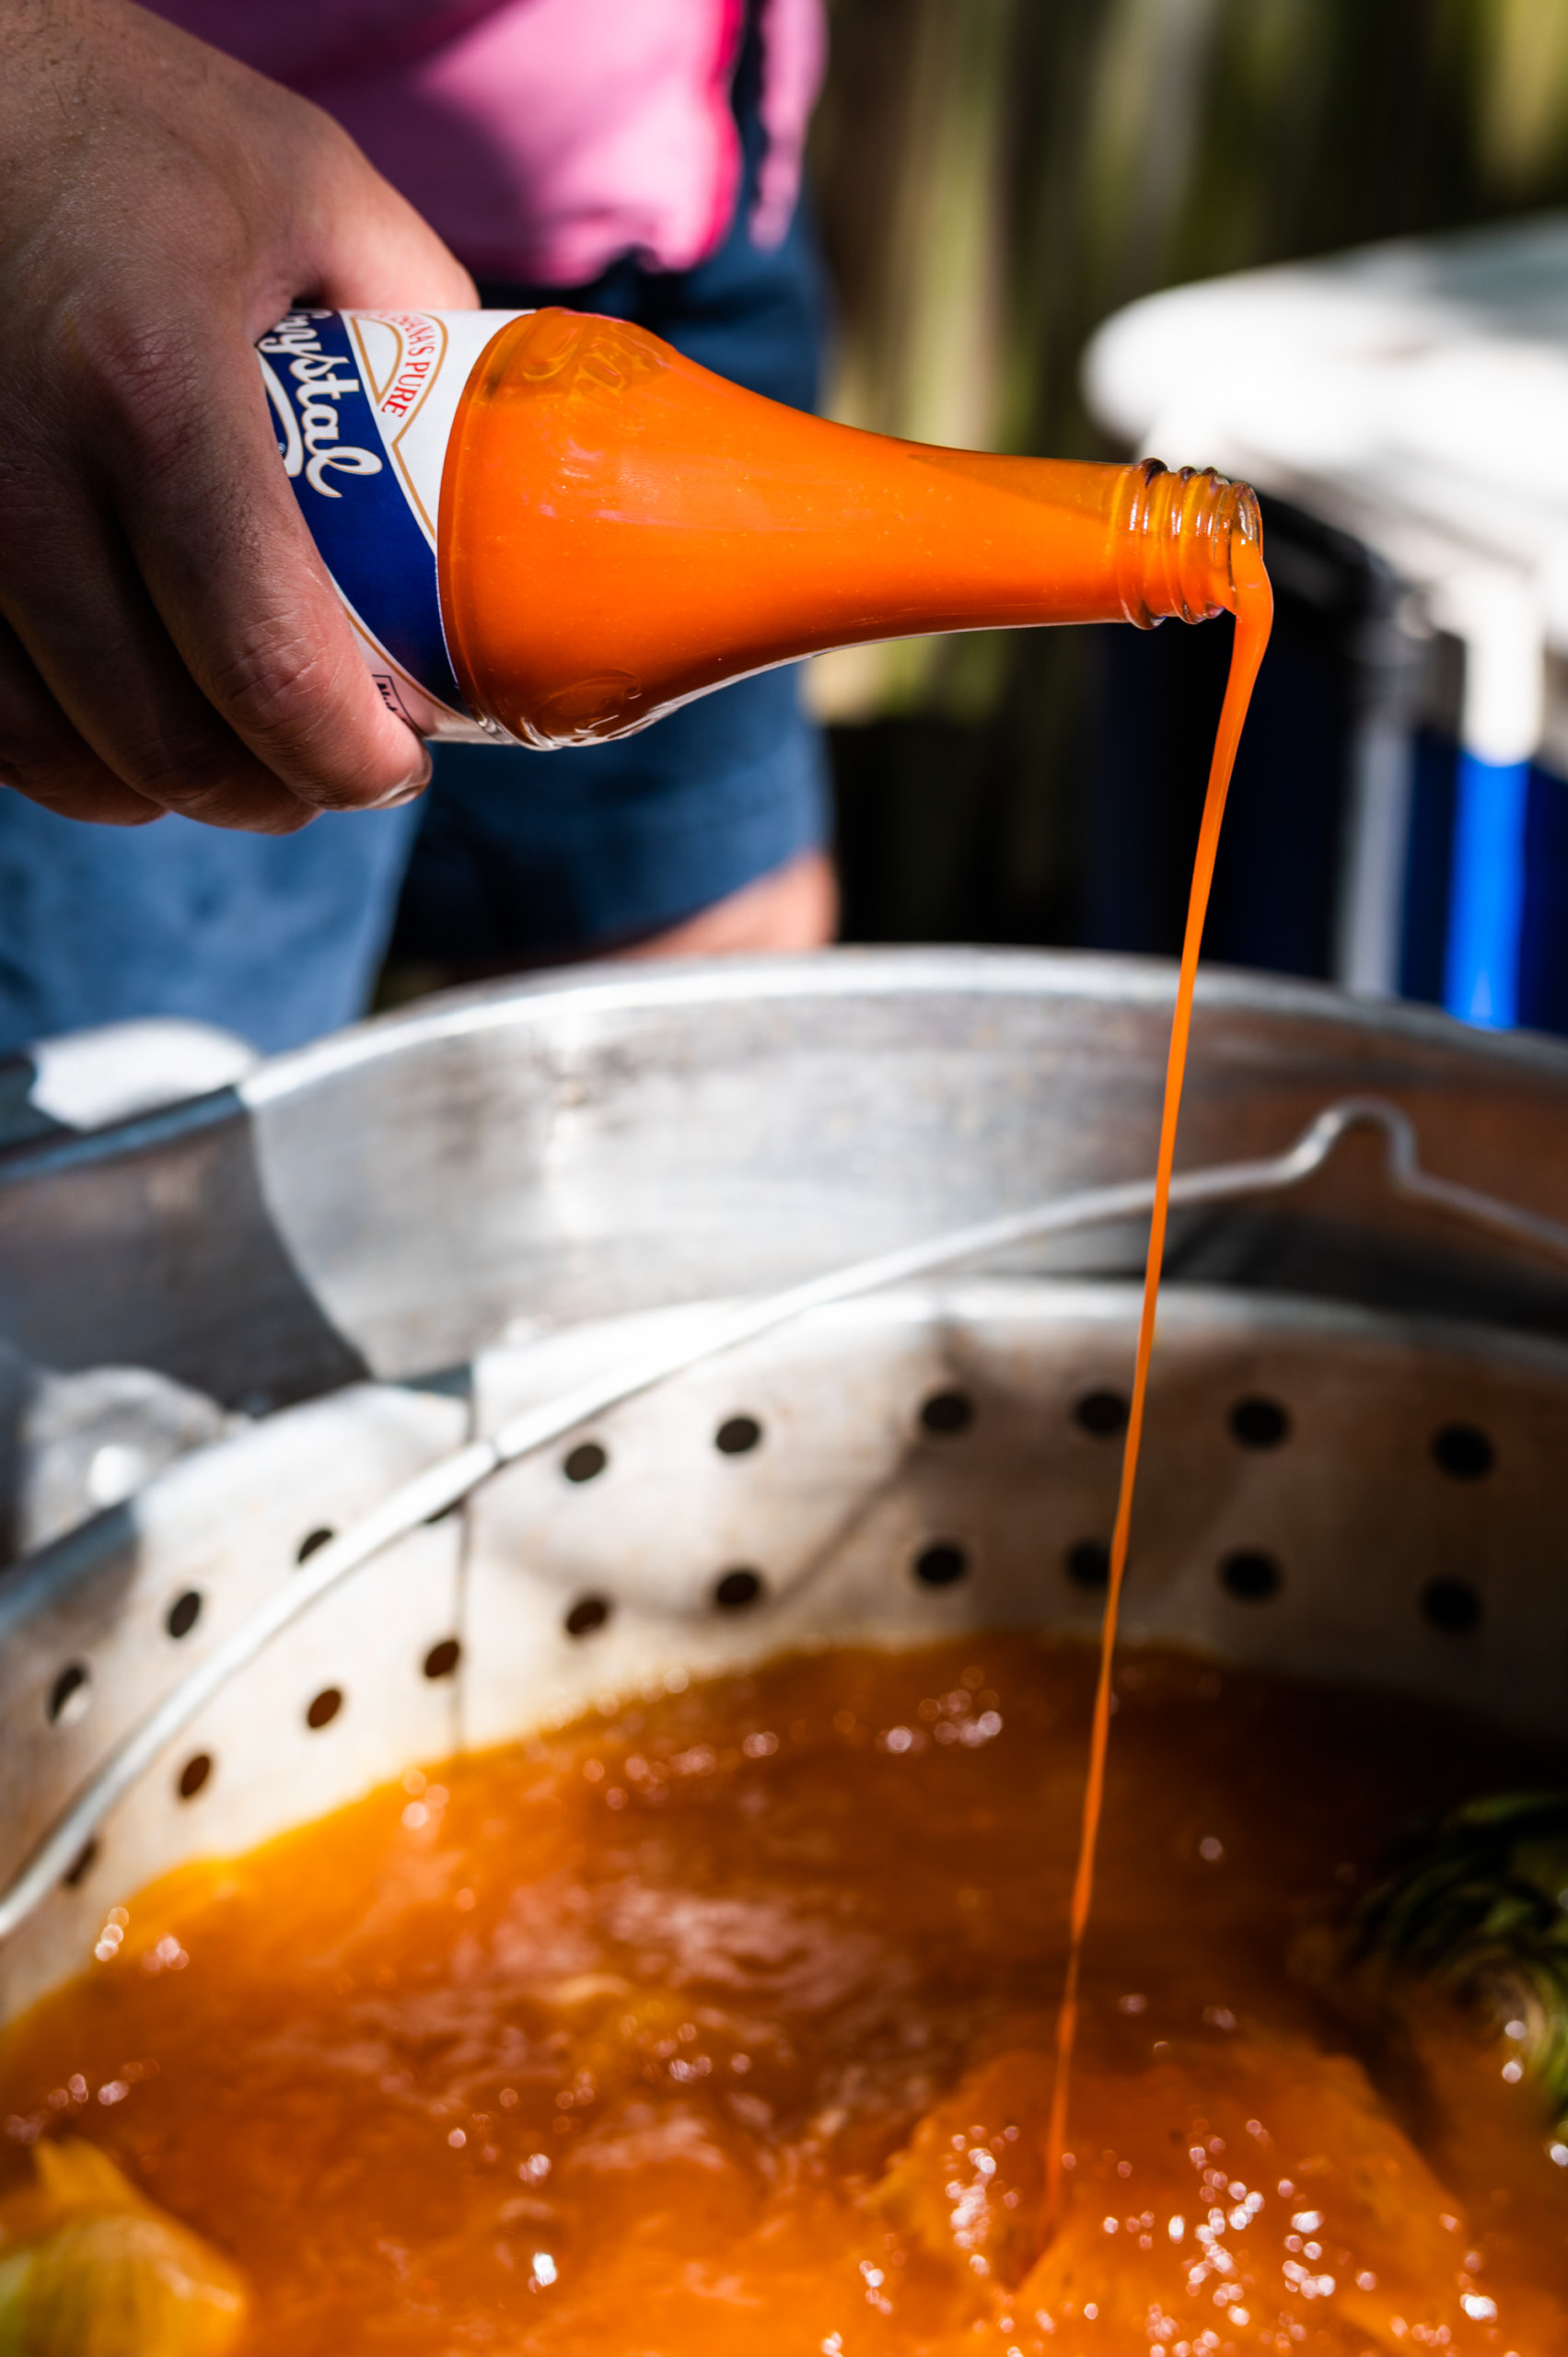 Crystal Hot Sauce is poured into the crawfish boil